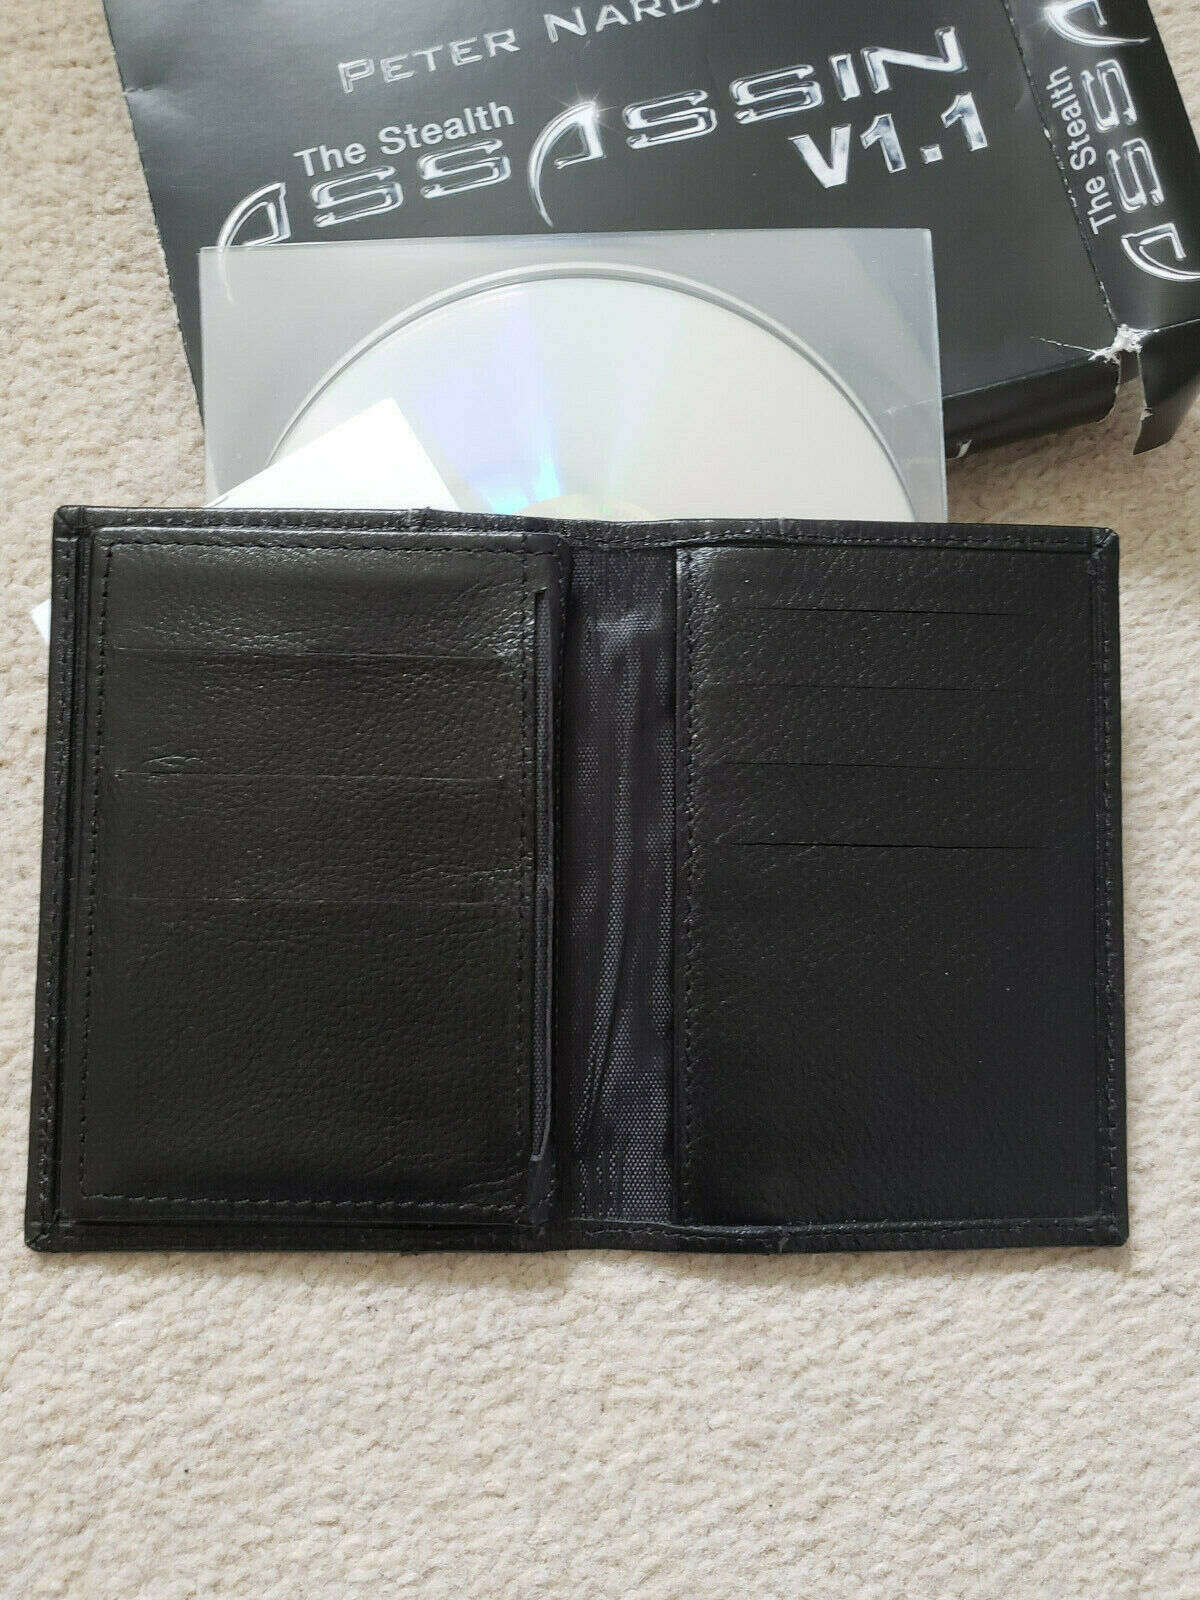 Stealth Assassin Wallet (V1.1) by Peter Nardi and Marc Spelmann black shown open with DVD and box underneath